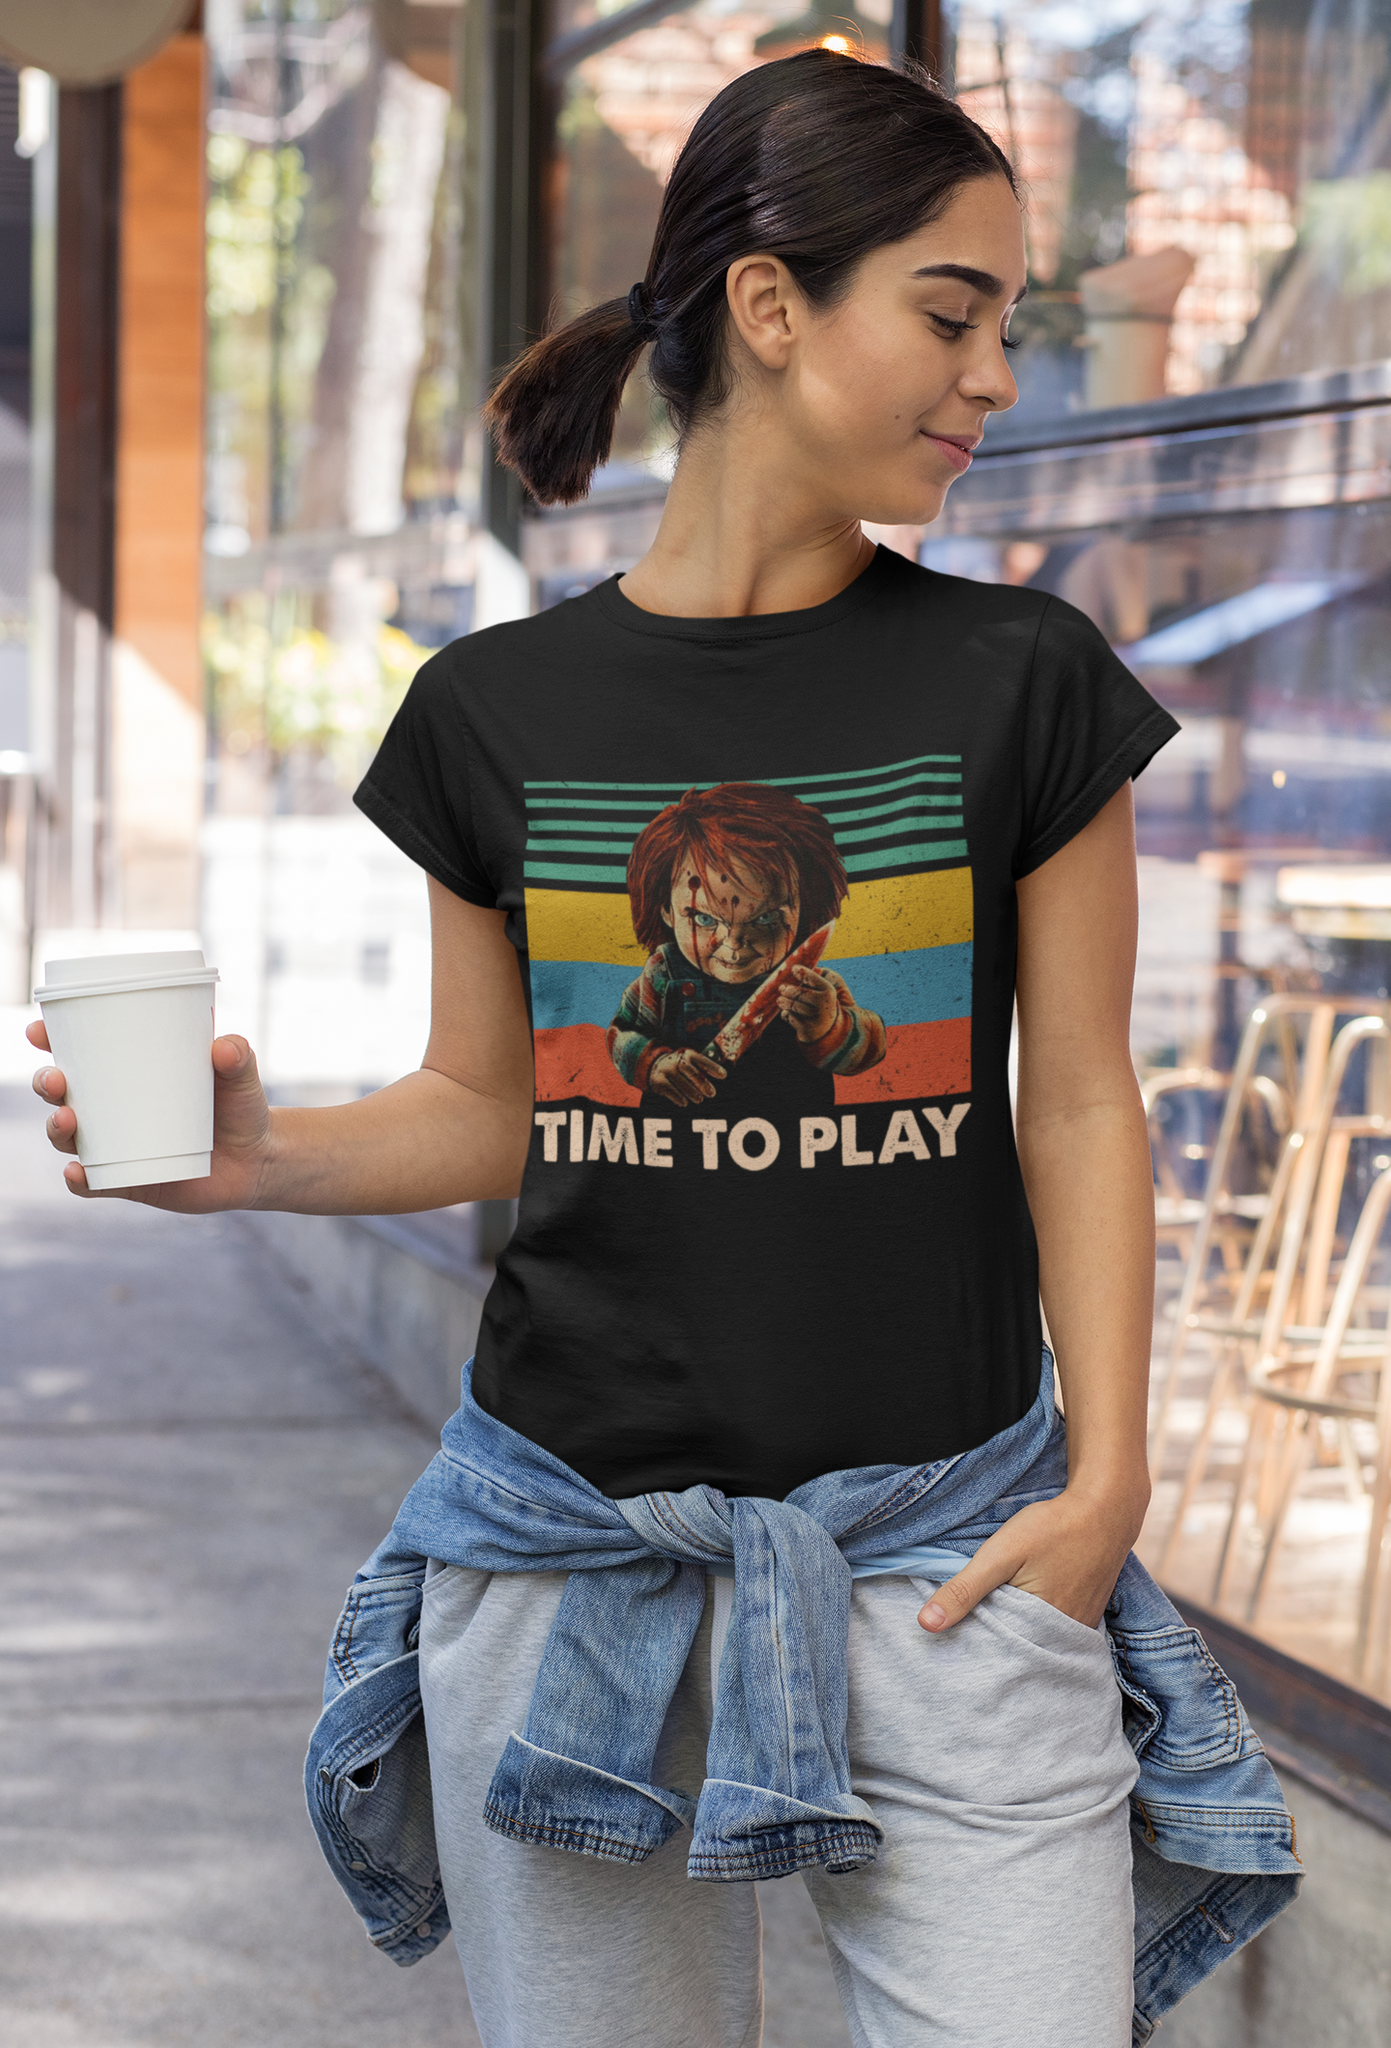 Chucky Vintage T Shirt, Horror Character Shirt, Time To Play T Shirt, Halloween Gifts